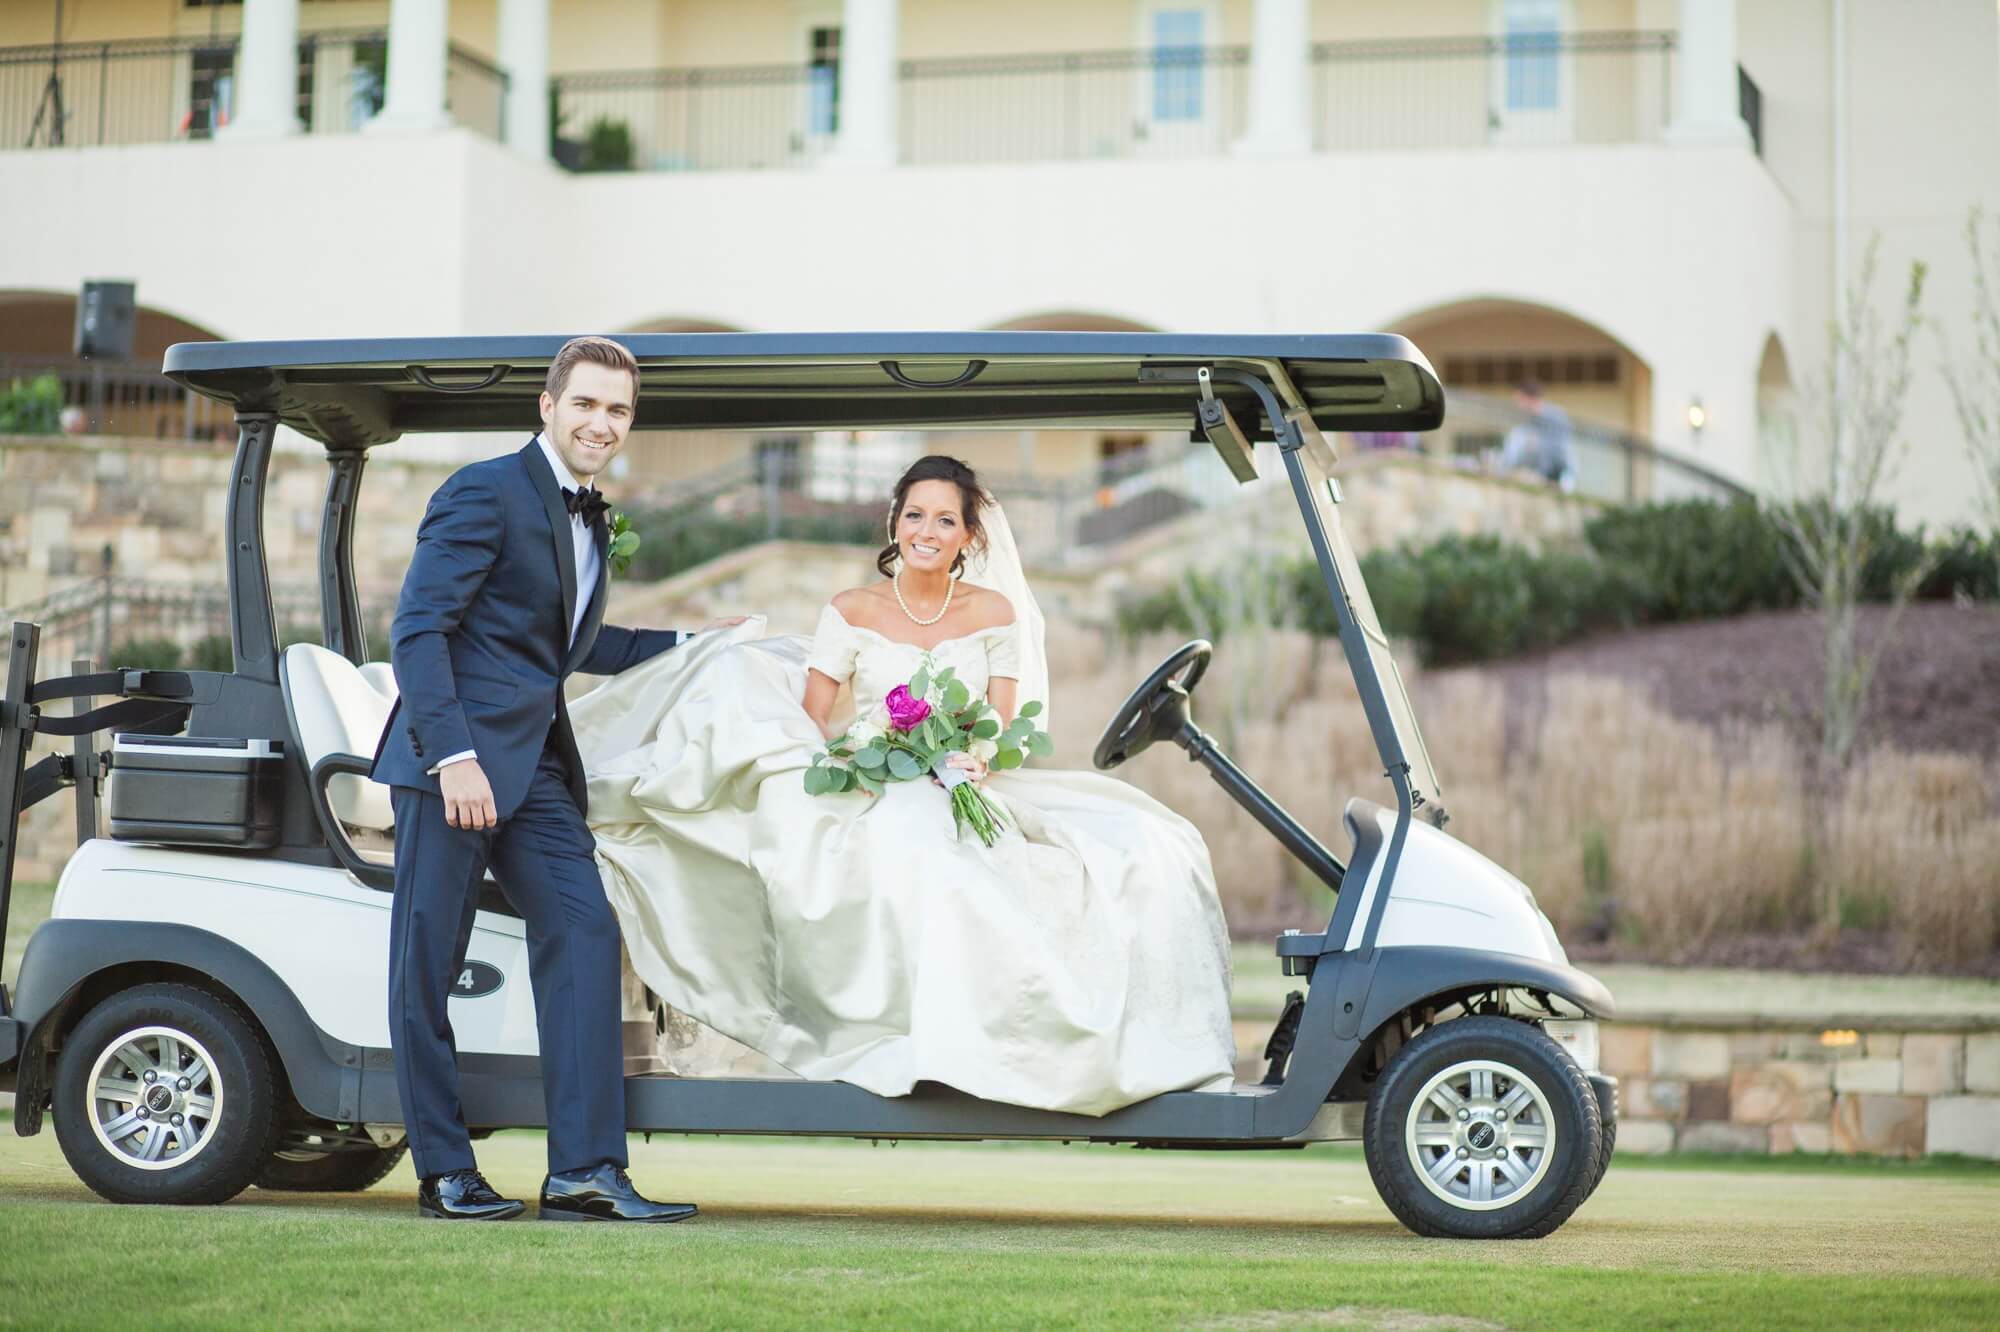 Bride and groom photos on golf cart after ceremony at The Grove golf course in College Grove, TN. Photos by Krista Lee Photography. 